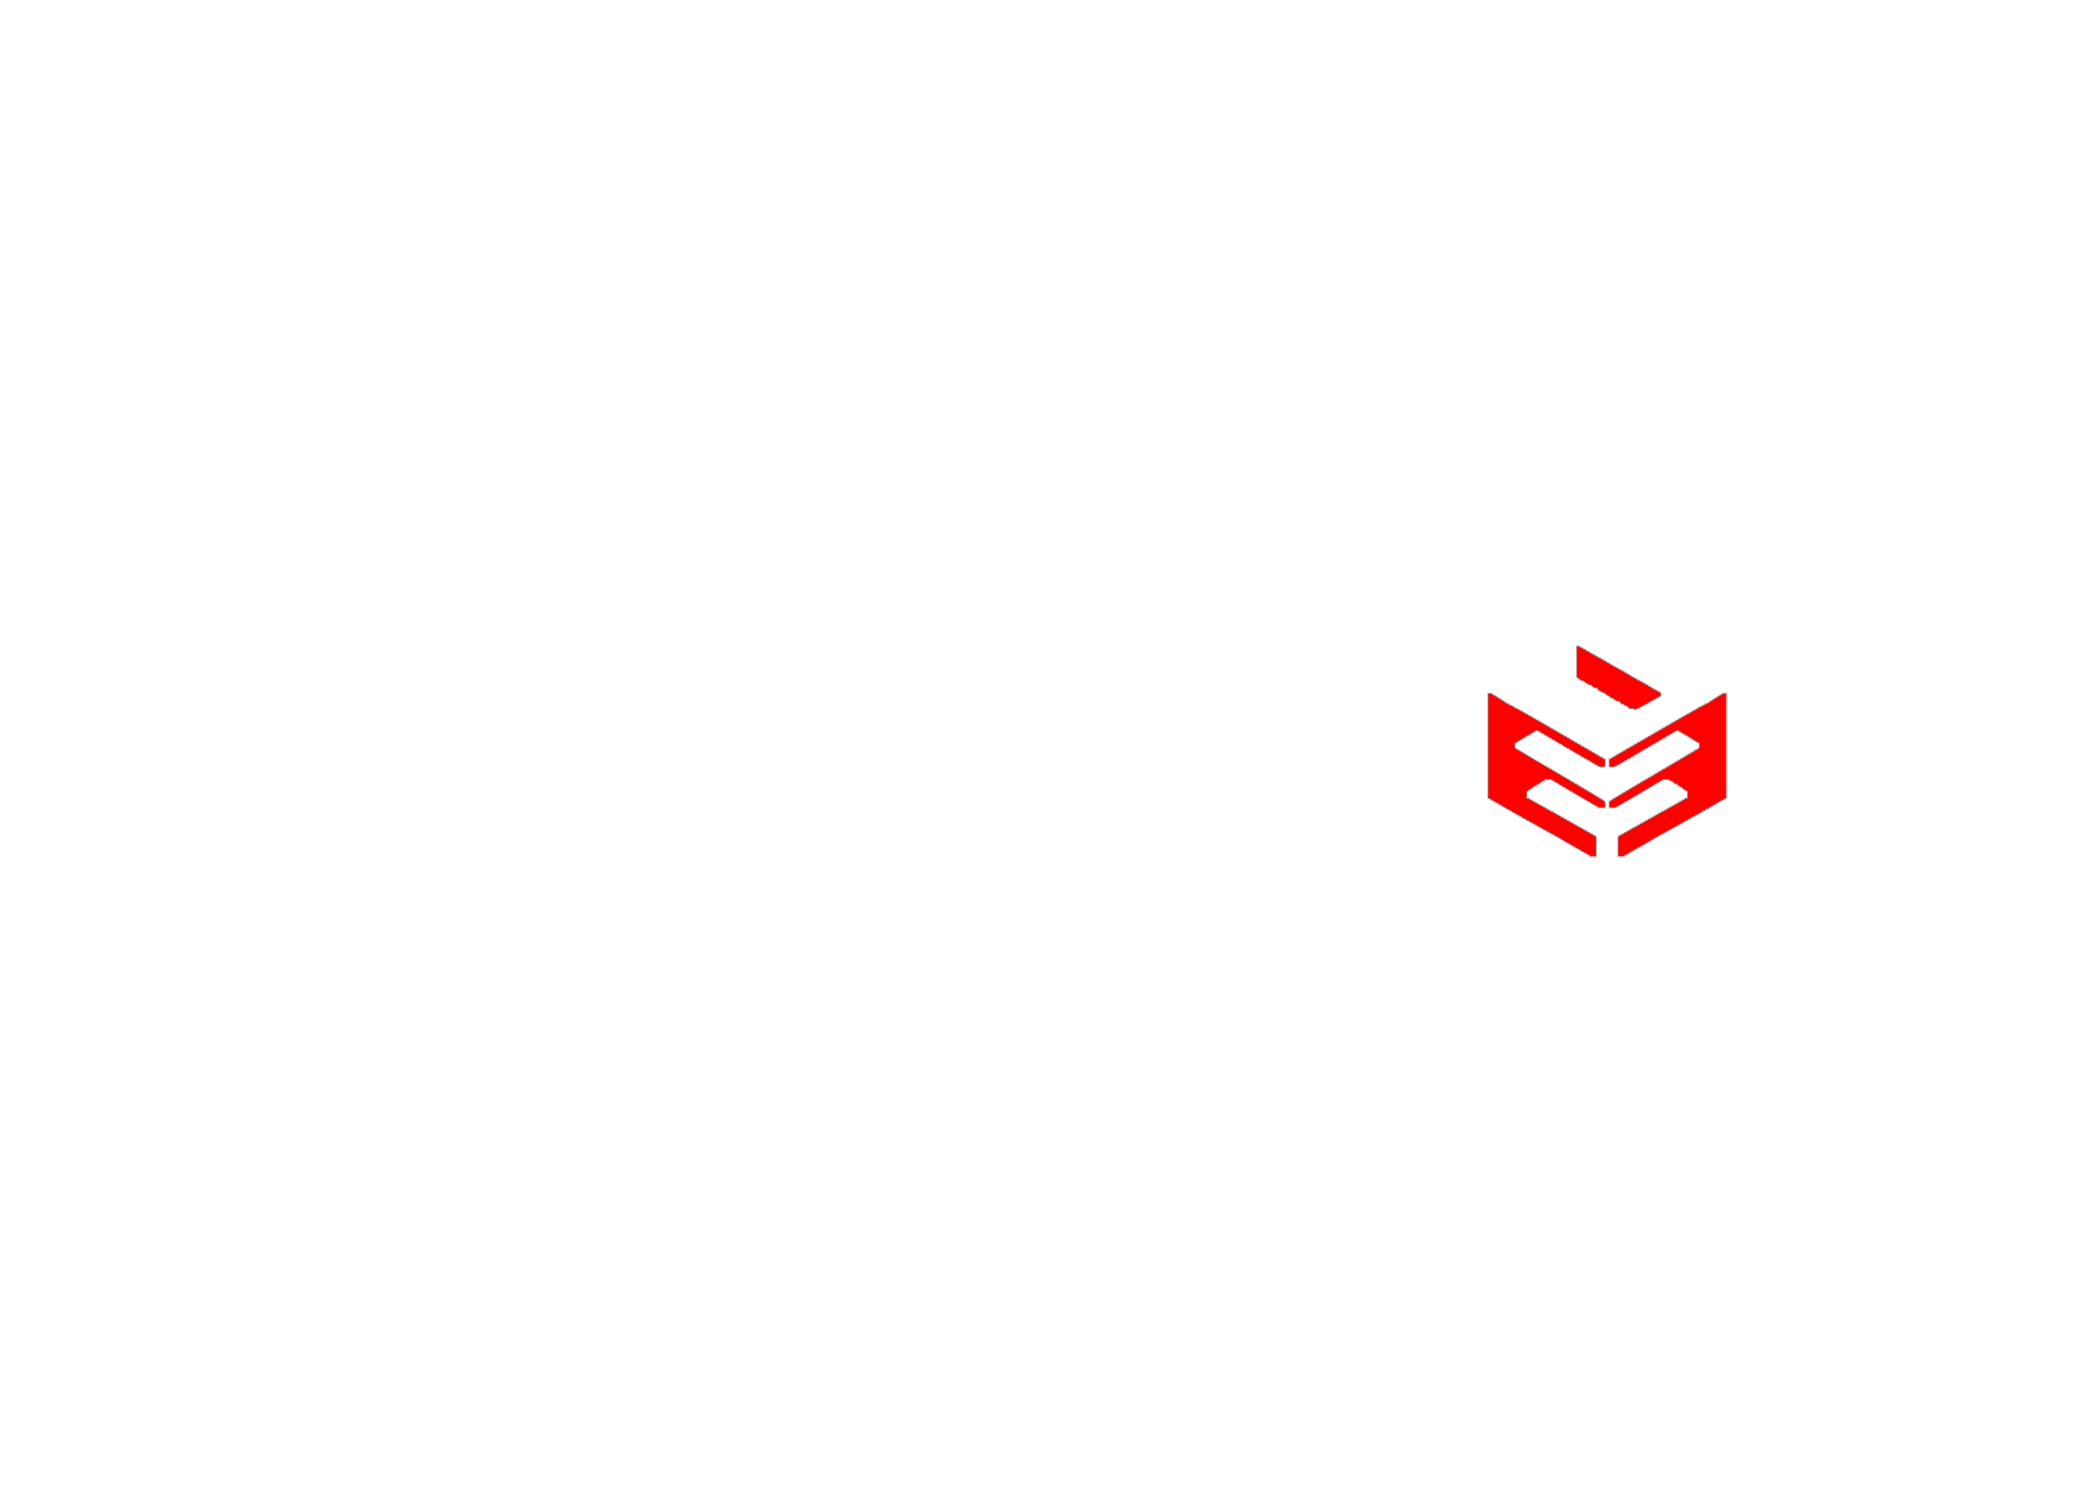 BC Computer Science Students Association